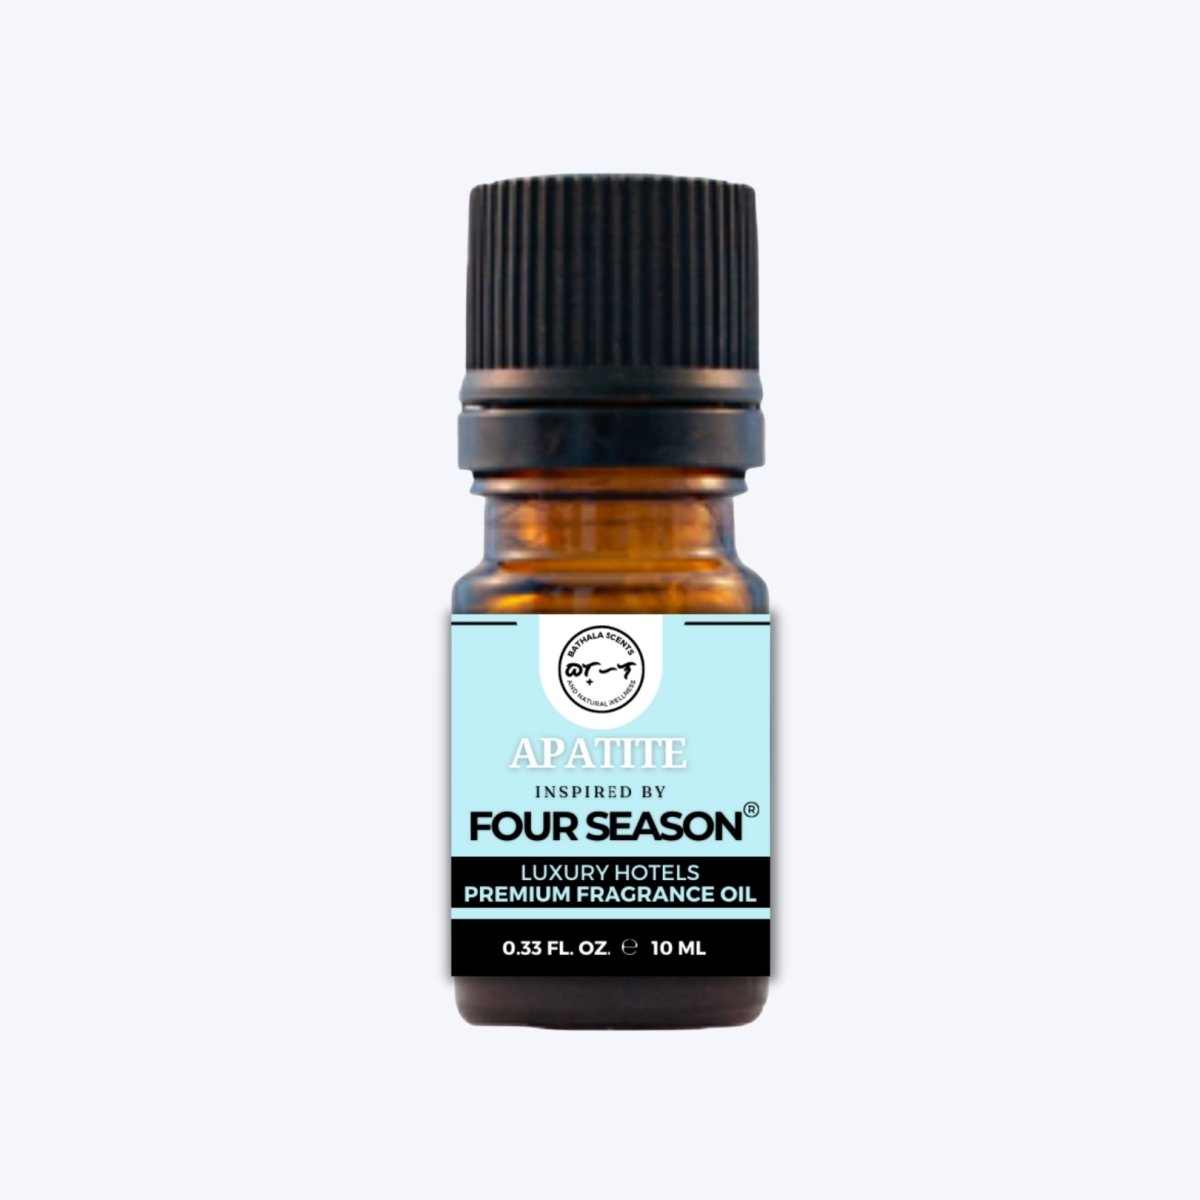 Apatite Inspired by Four Season Luxury Hotels Fragrance Oil 10ml - Bathala Scents and Natural Wellness